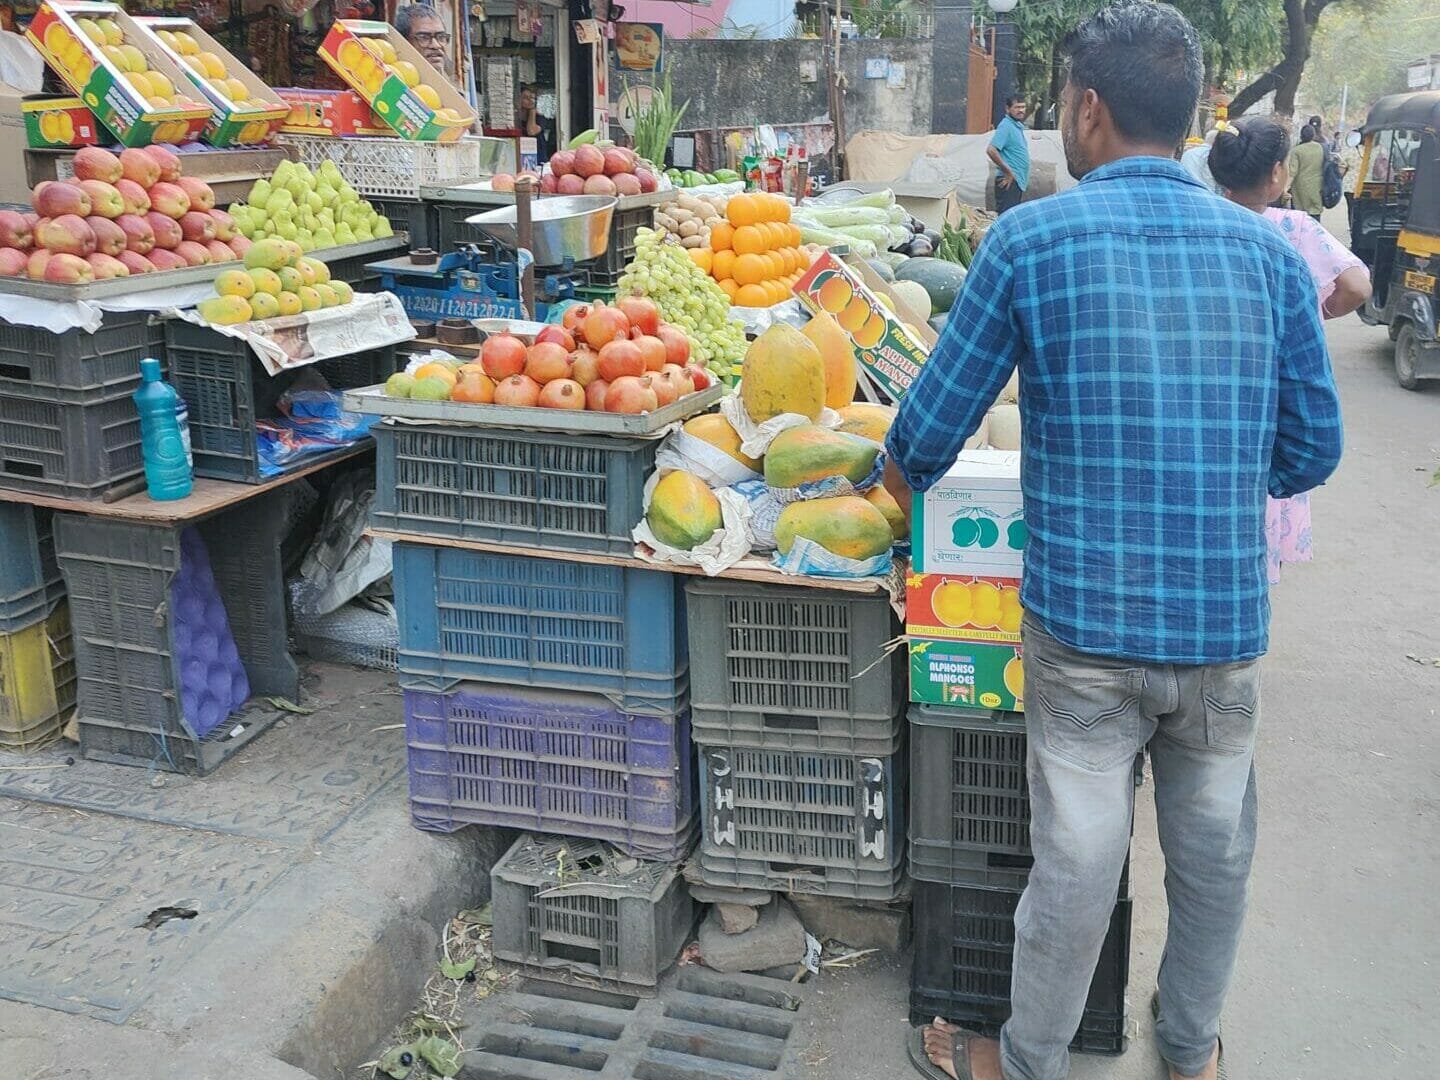 A fruit vendor selling fruits on the street